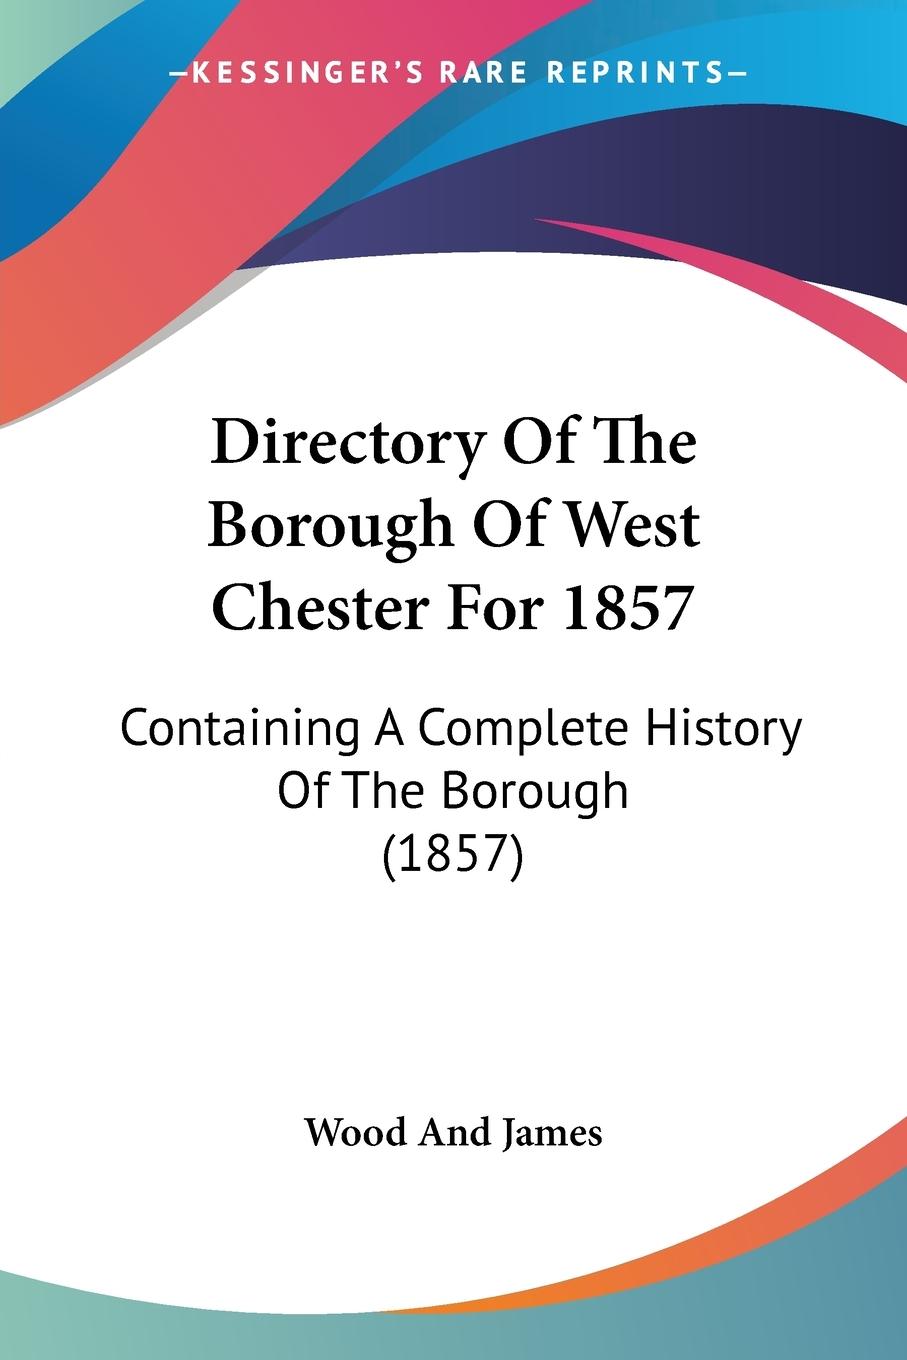 Directory Of The Borough Of West Chester For 1857 - Wood And James